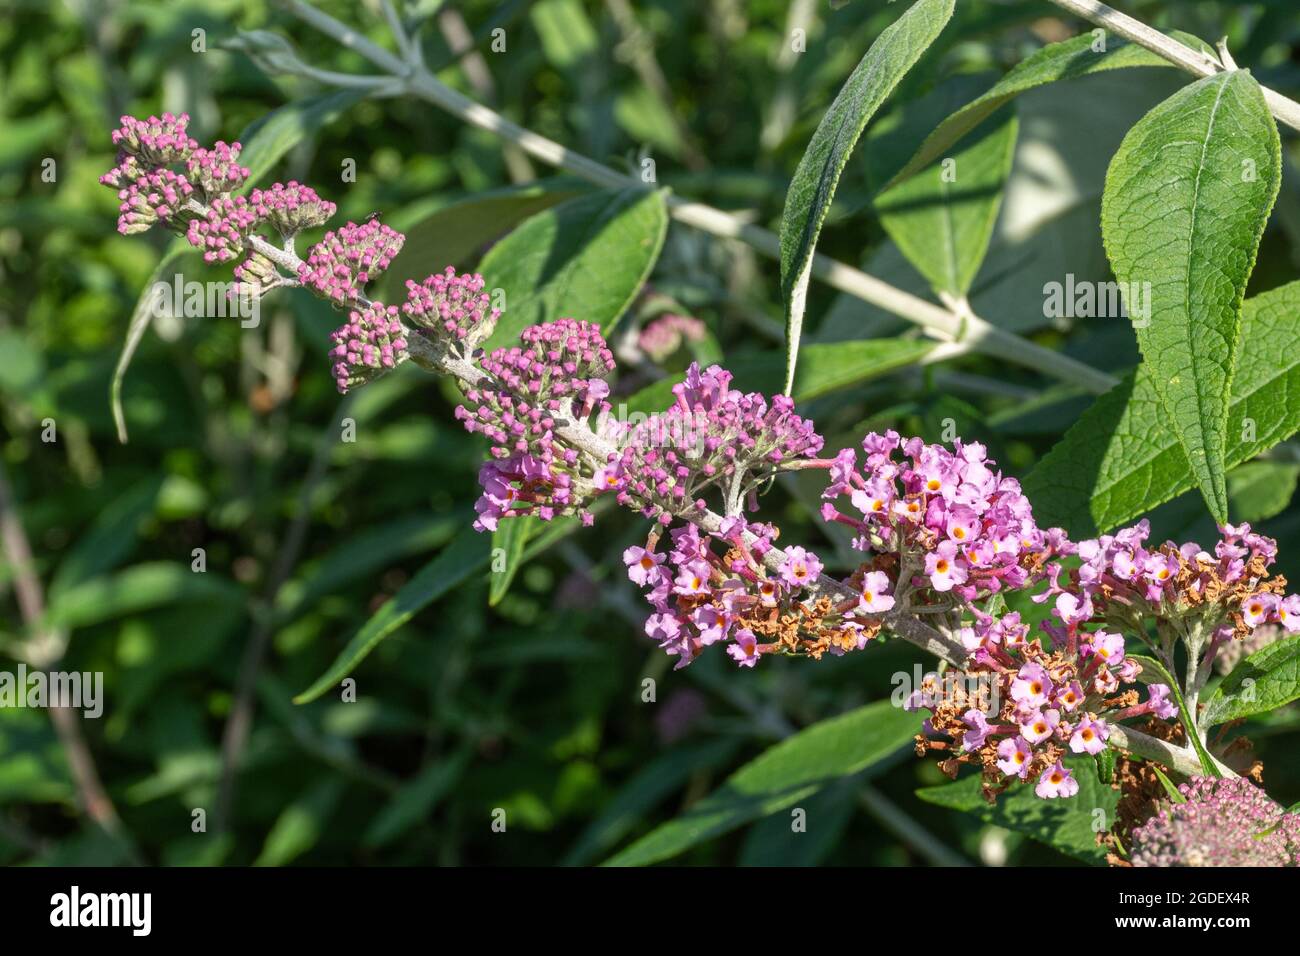 Buddleja x weyeriana 'Pink Pagoda' also called 'Inspired Pink' (buddleia variety), known as a butterfly bush, in flower during august or summer, UK Stock Photo